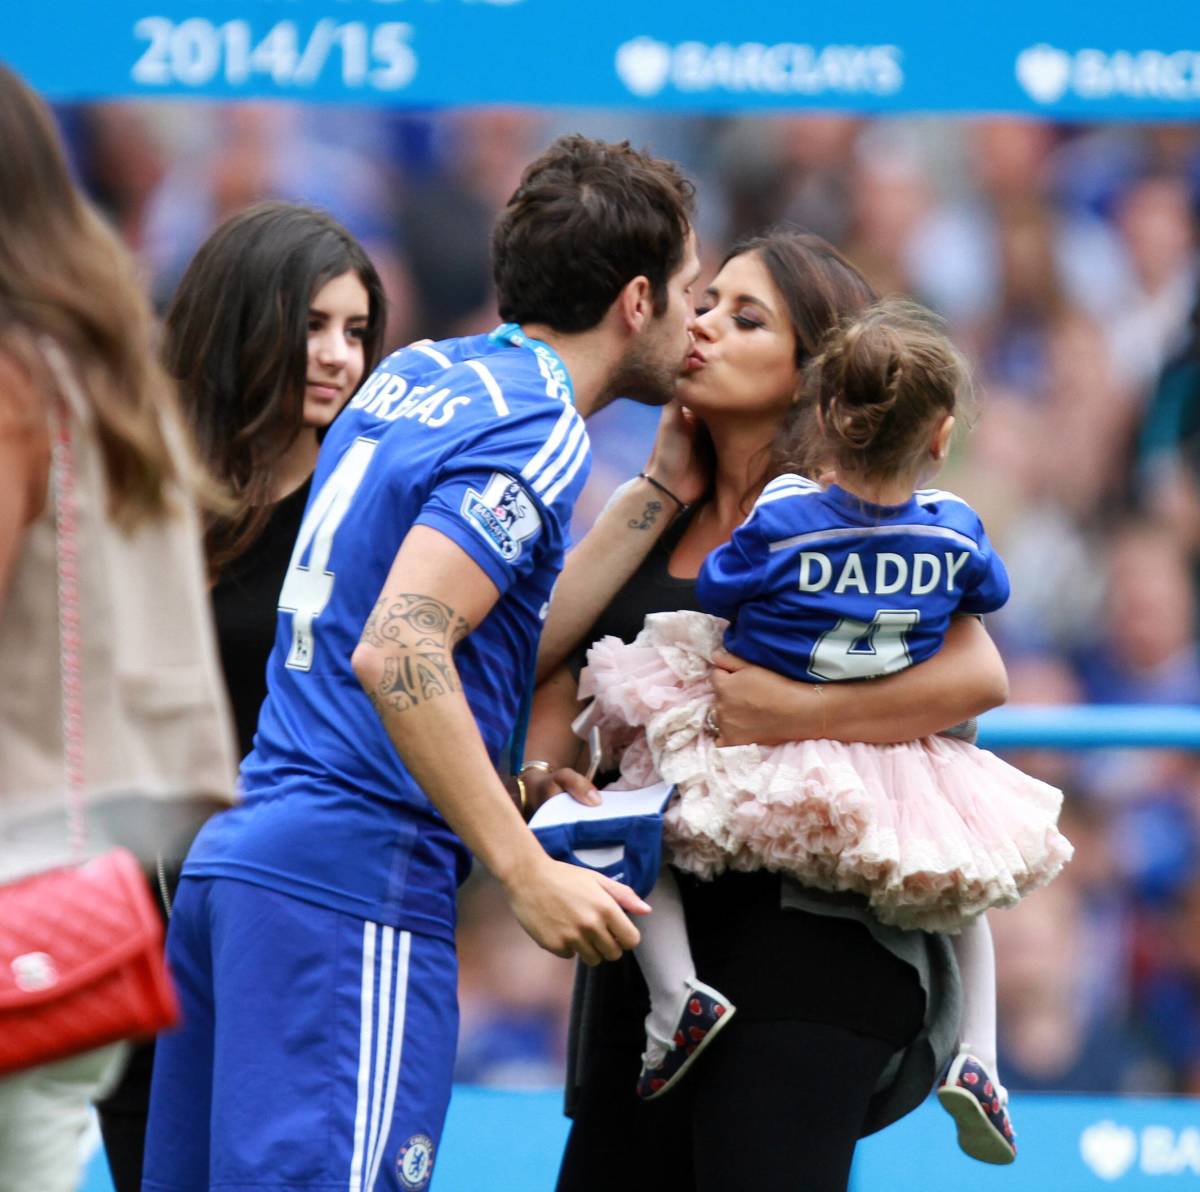 Cesc Fabregas pictured kissing wife Daniella Semaan after winning the Premier League with Chelsea in 2015